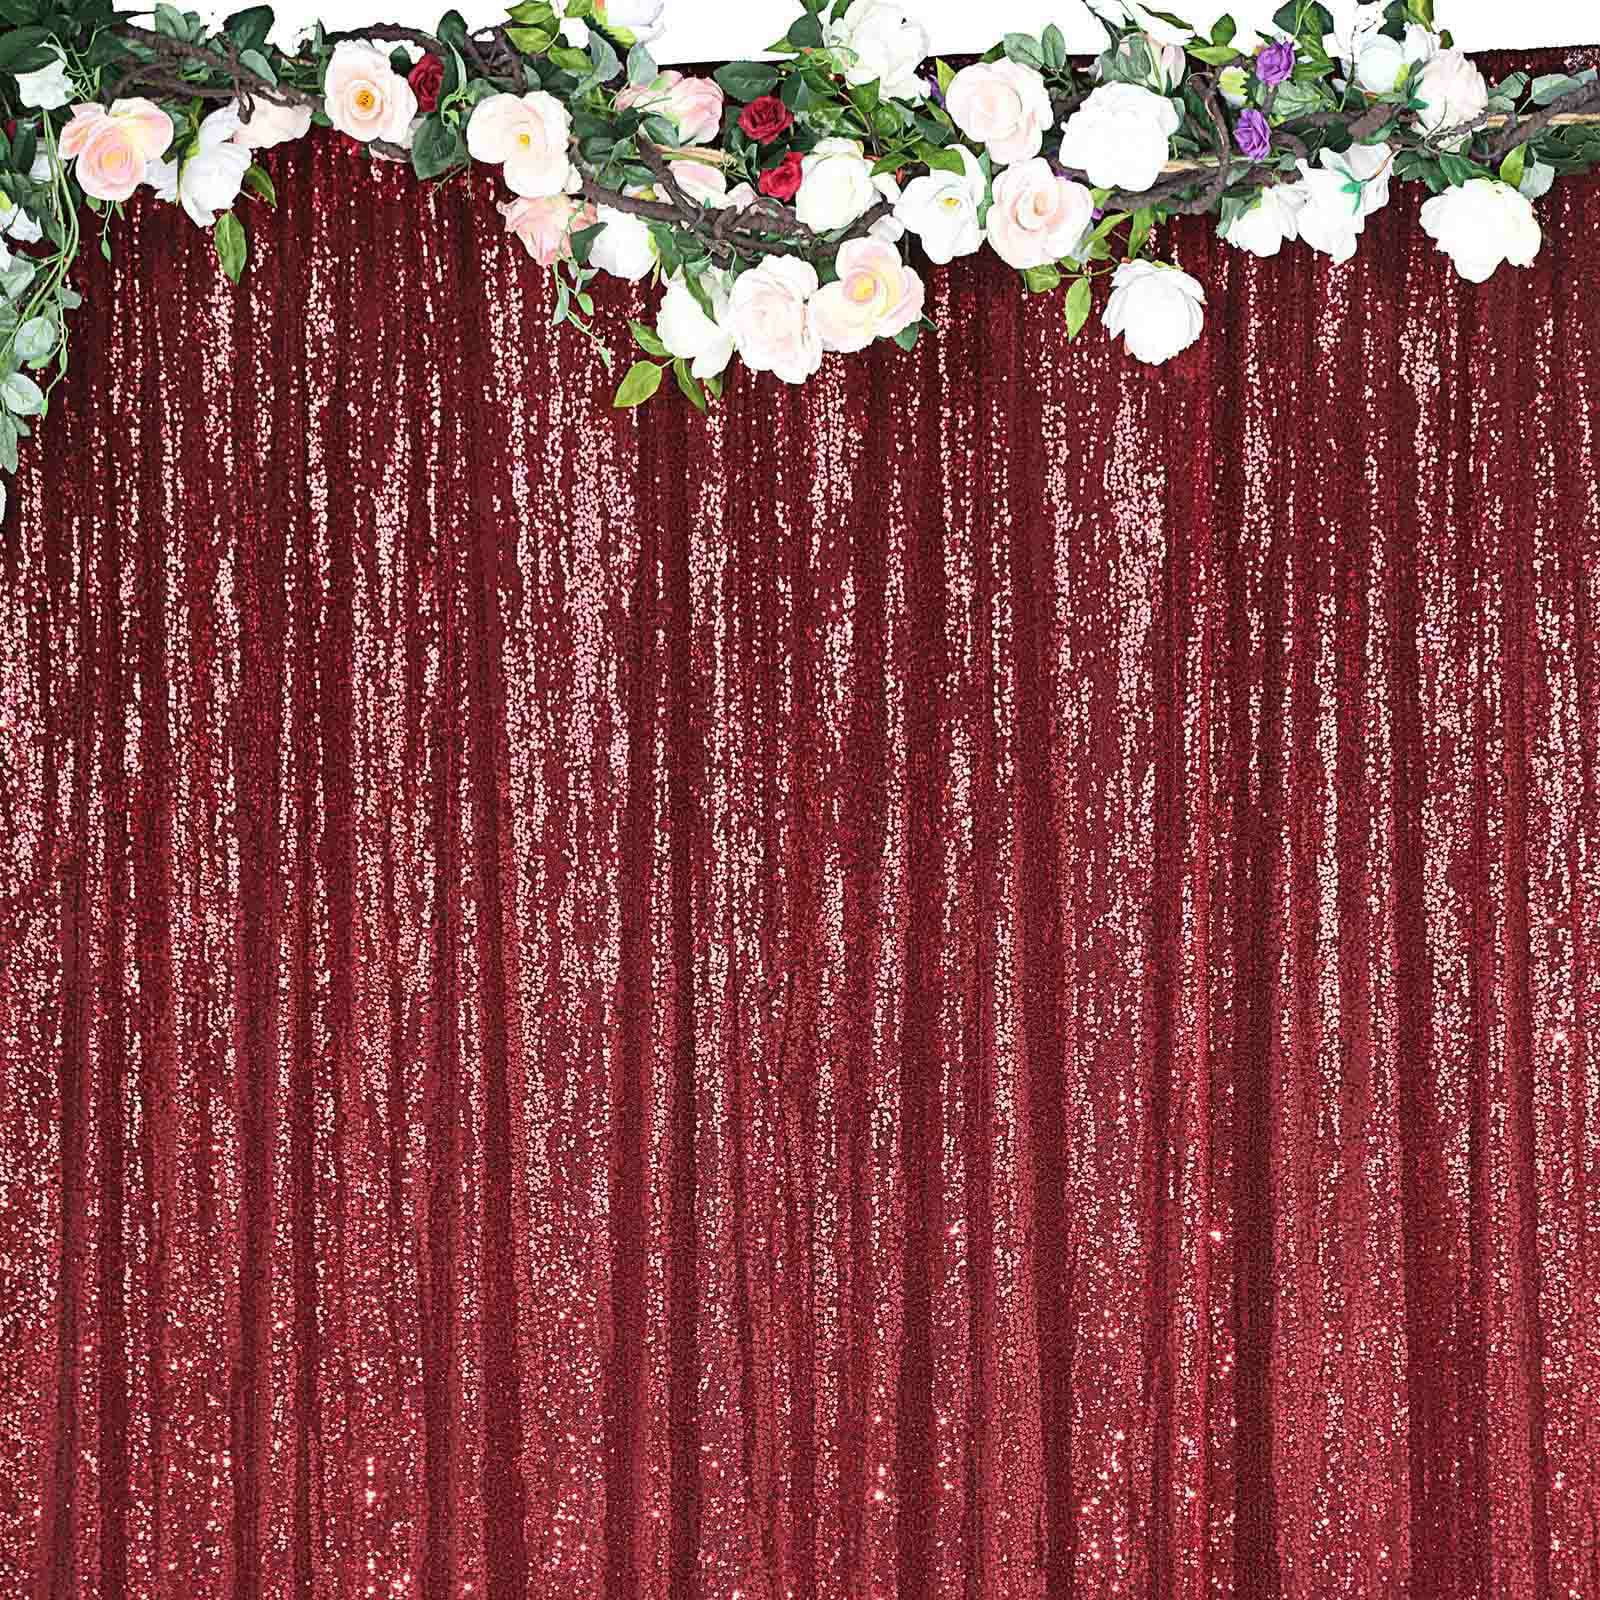  DUOBAO Sequin Backdrop 8x8 Ft Burgundy Backdrop for Party  Sequin Backdrop Curtain 8Ft Great Gatsby Party Decorations Wedding Backdrop  Glitter Backdrop : Electronics